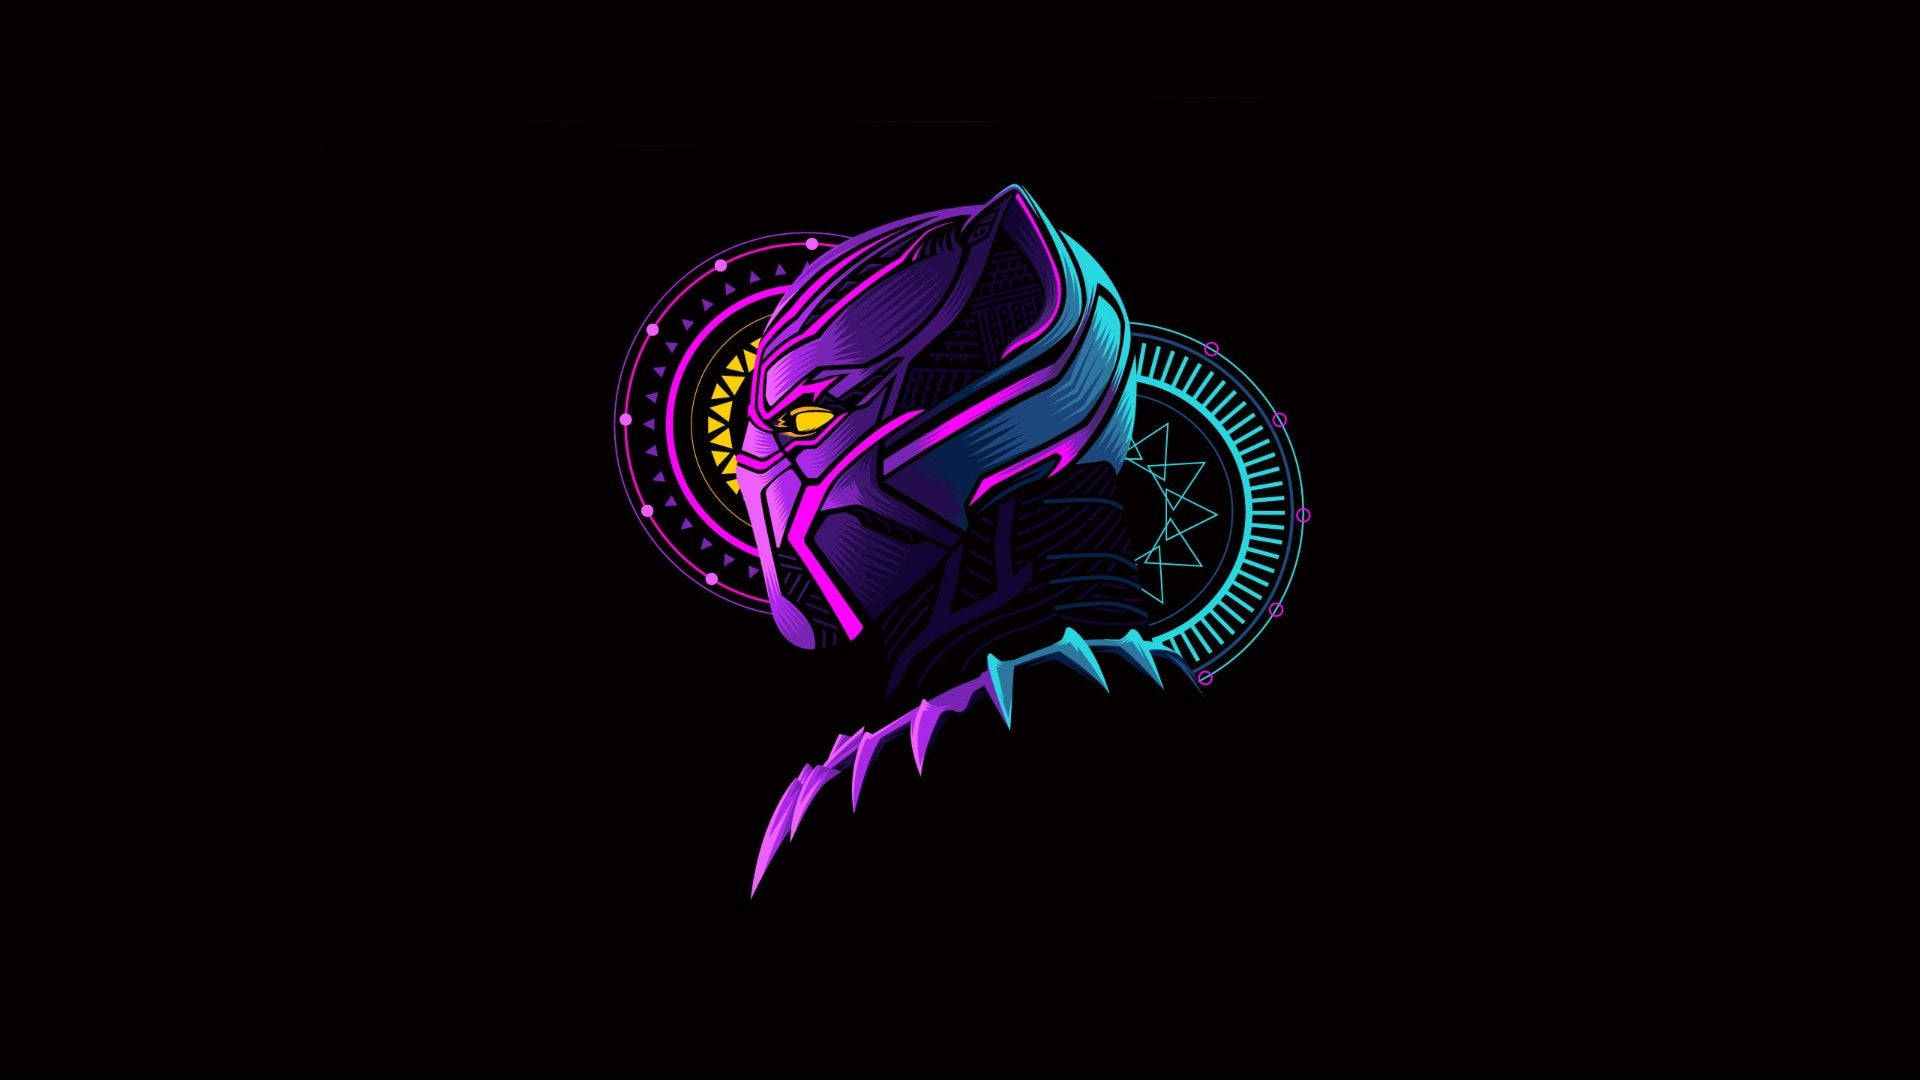 Black Panther In Geometric Design Background